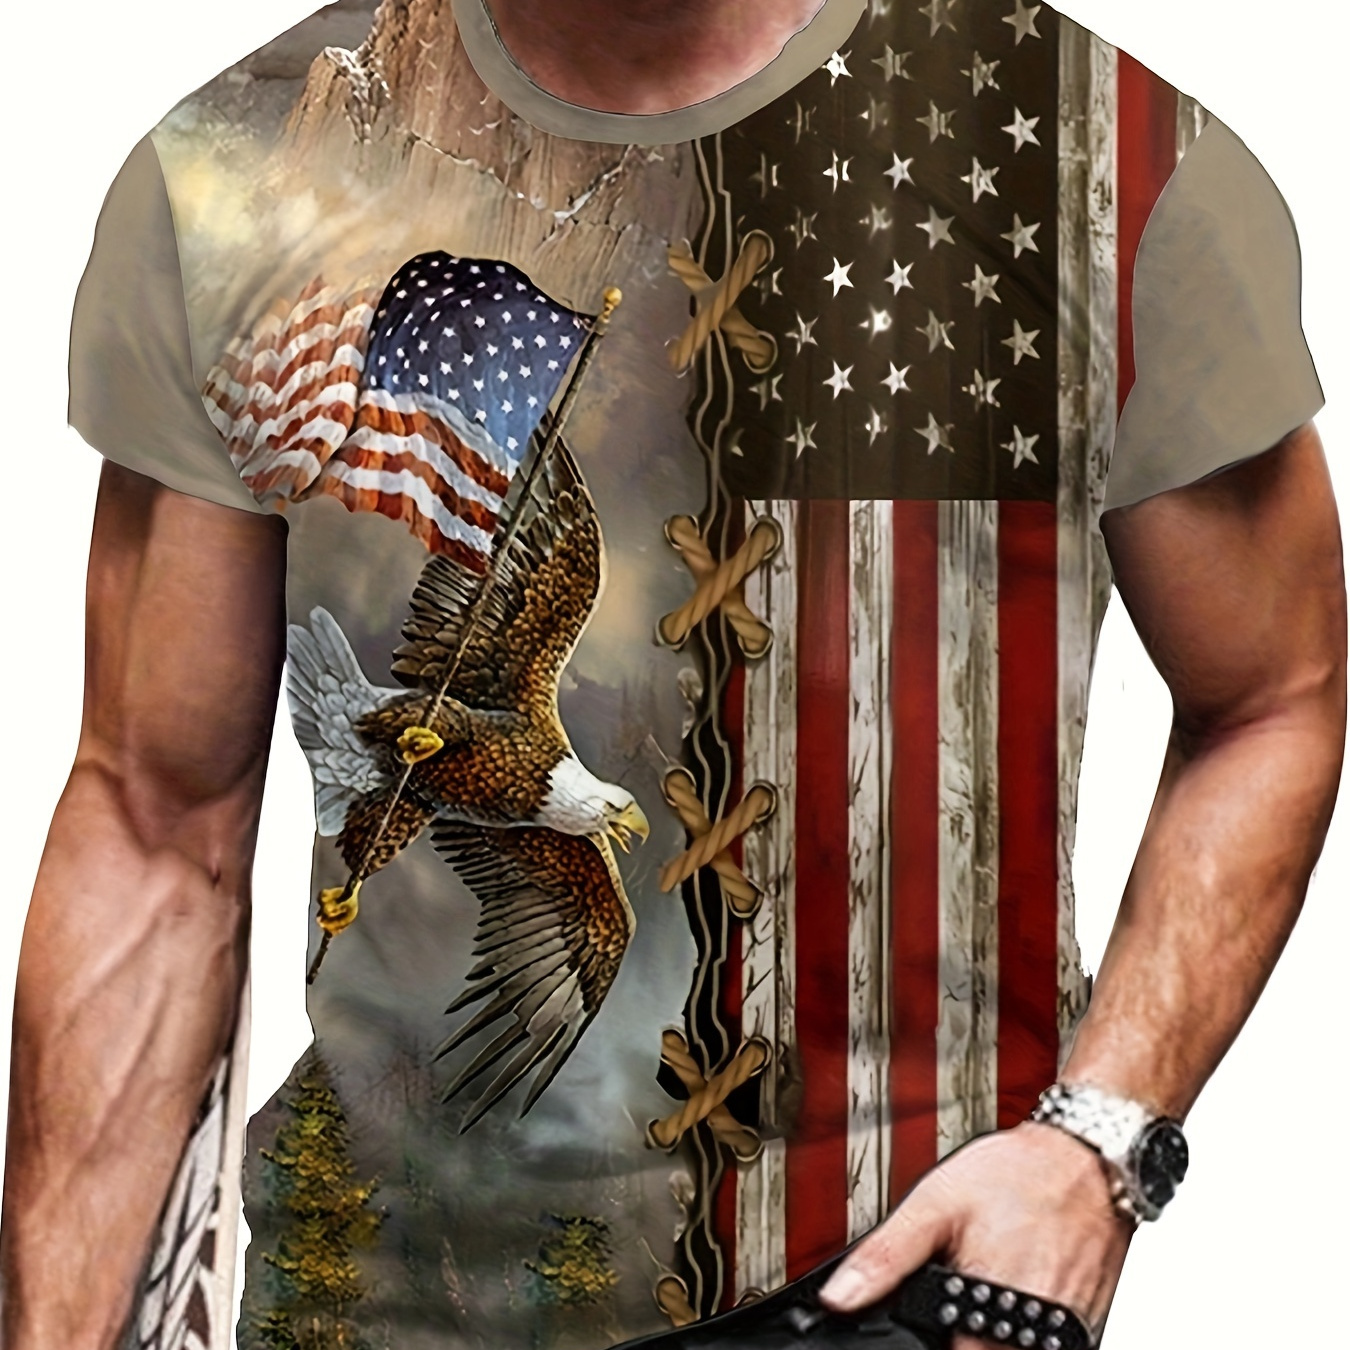 

Eagle & Flag Pattern Print Plus Size Men's Short Sleeve T-shirt, Casual Fashion Crew Neck Tee, All Over Graphic Top For Outdoor Sports, Big & Tall